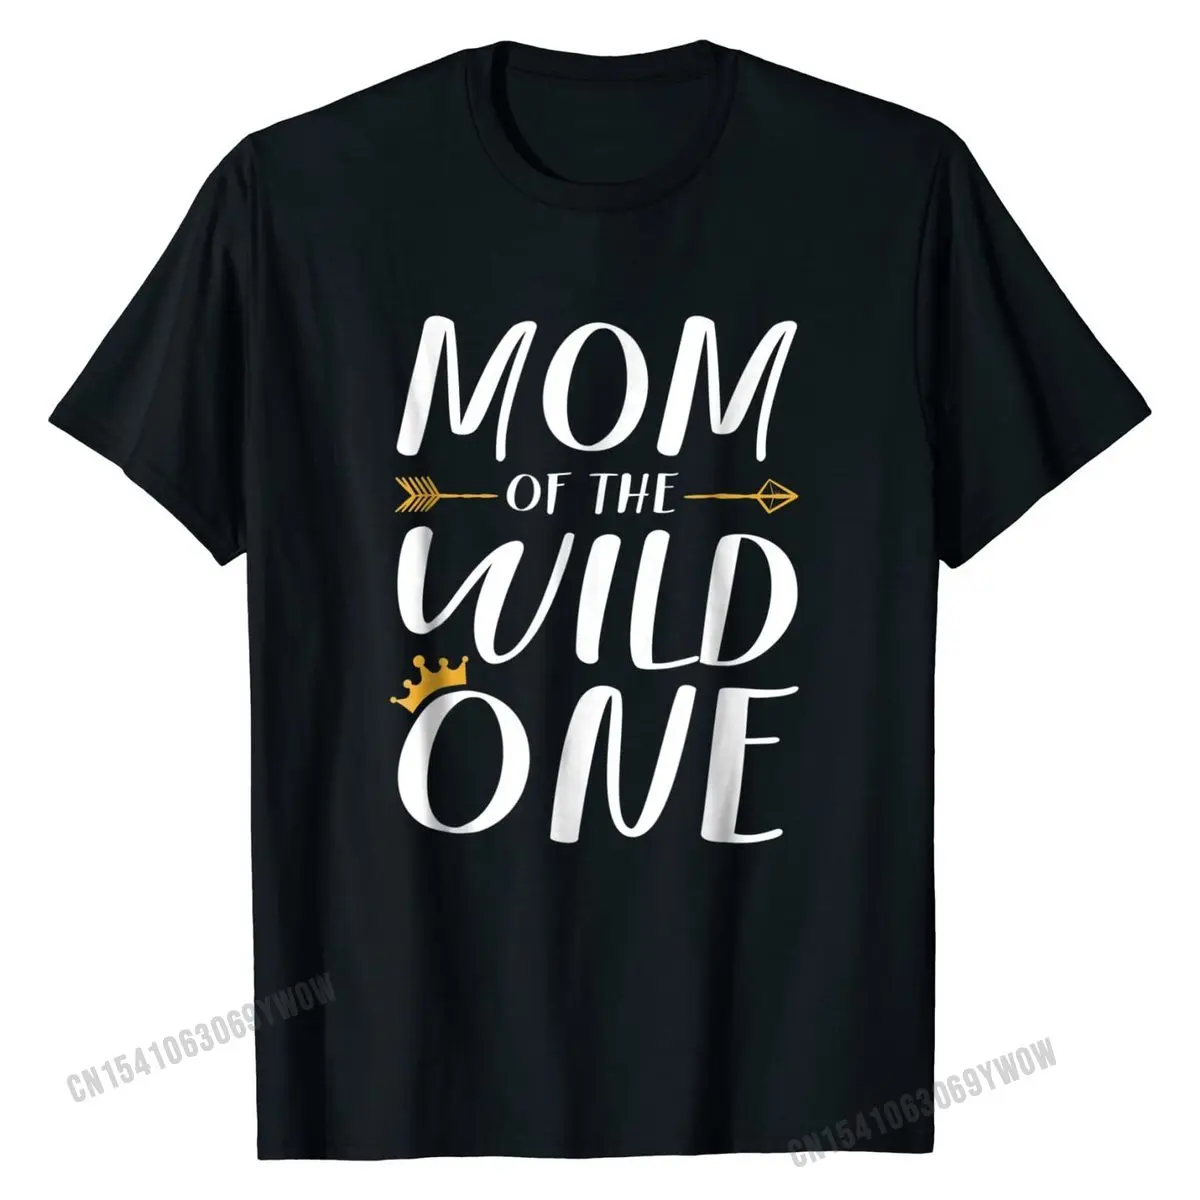 Funny Shirt Cute Mom Of The Wild One Thing 1st Birthday Normal Tops Shirt for Men Cotton Top T-shirts 3D Printed Wholesale